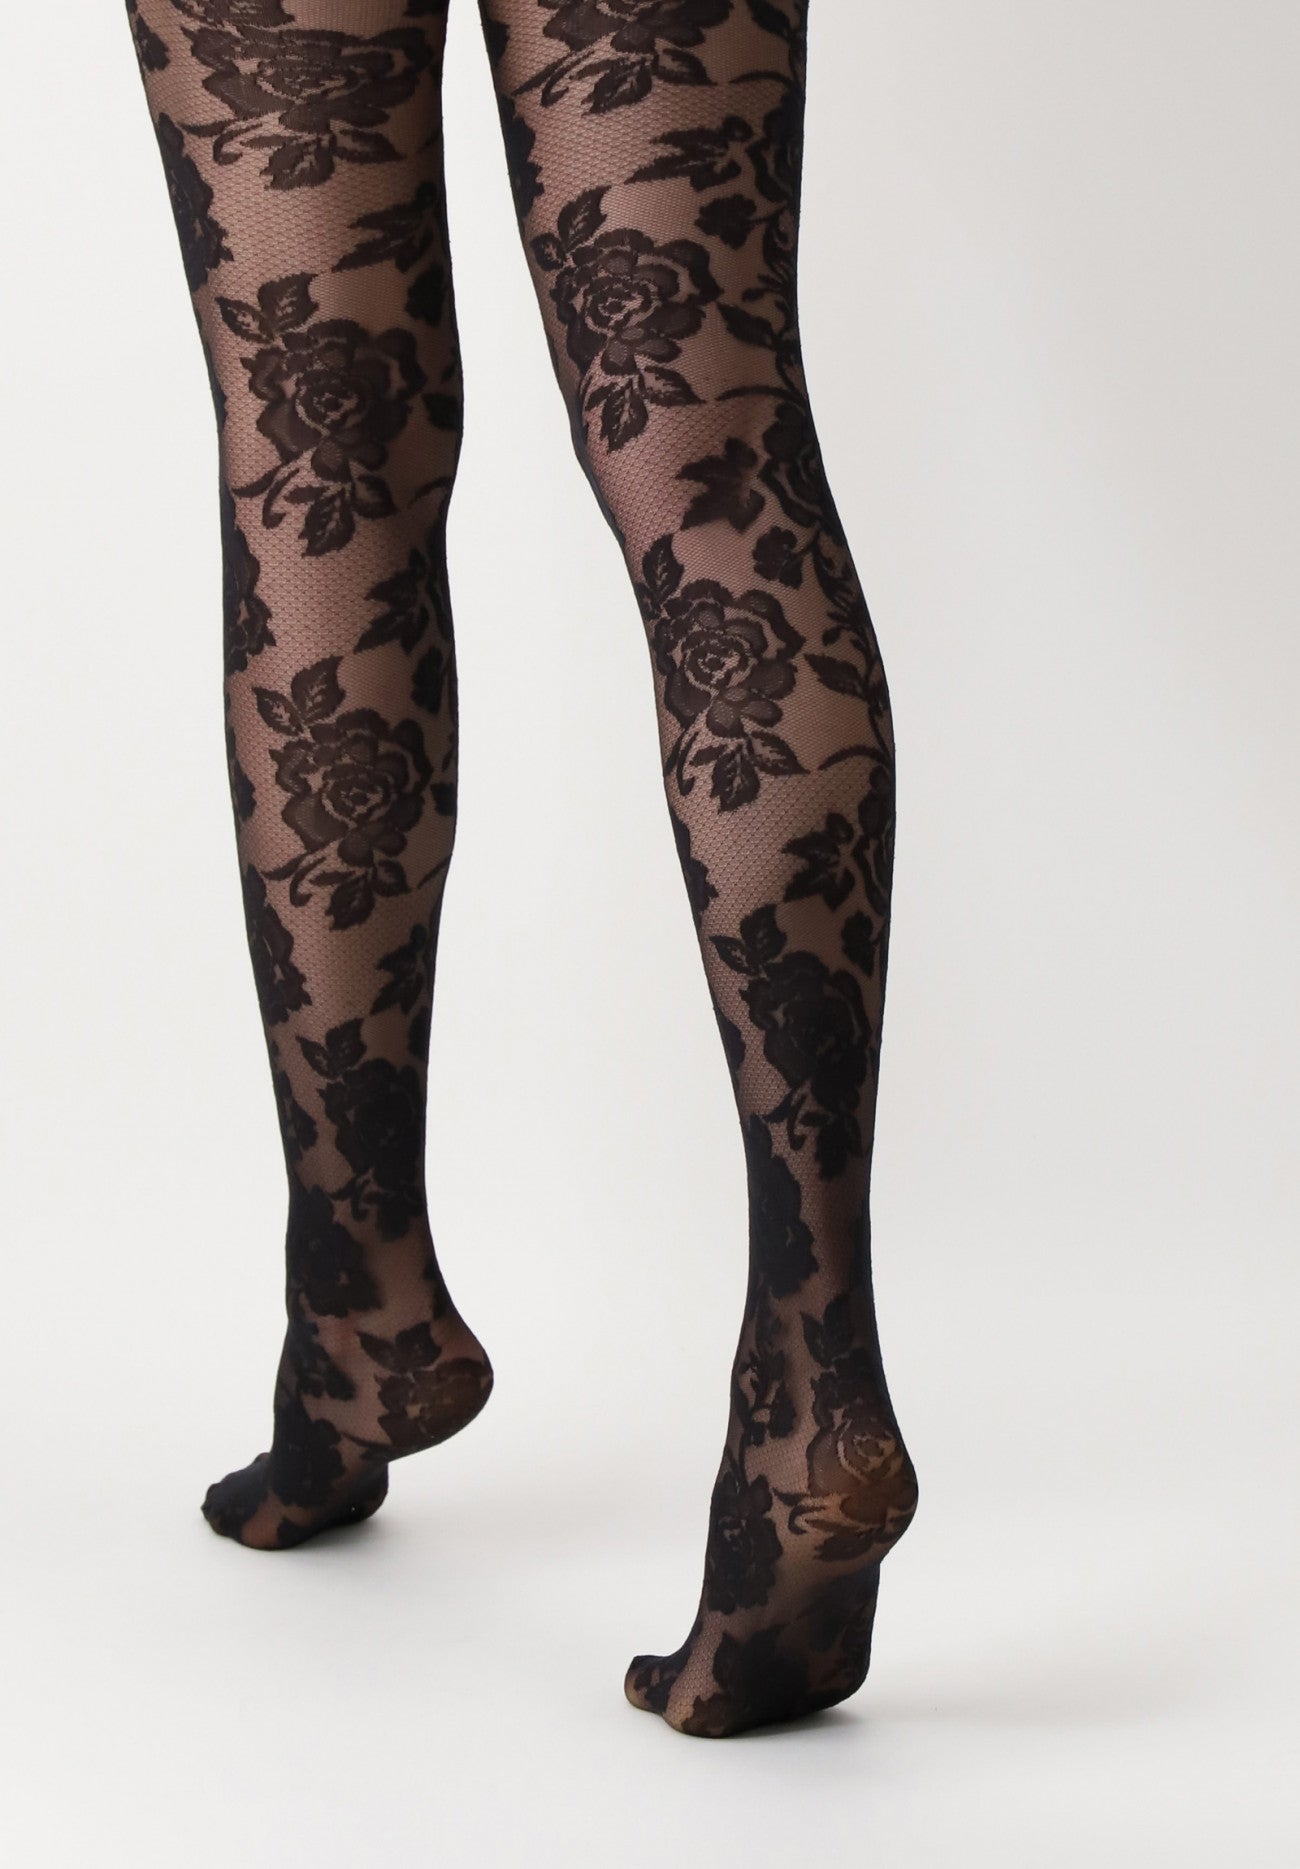 OroblÌ_ All Colors Lace Tights - Black floral lace style fashion tights with a deep comfort waistband.